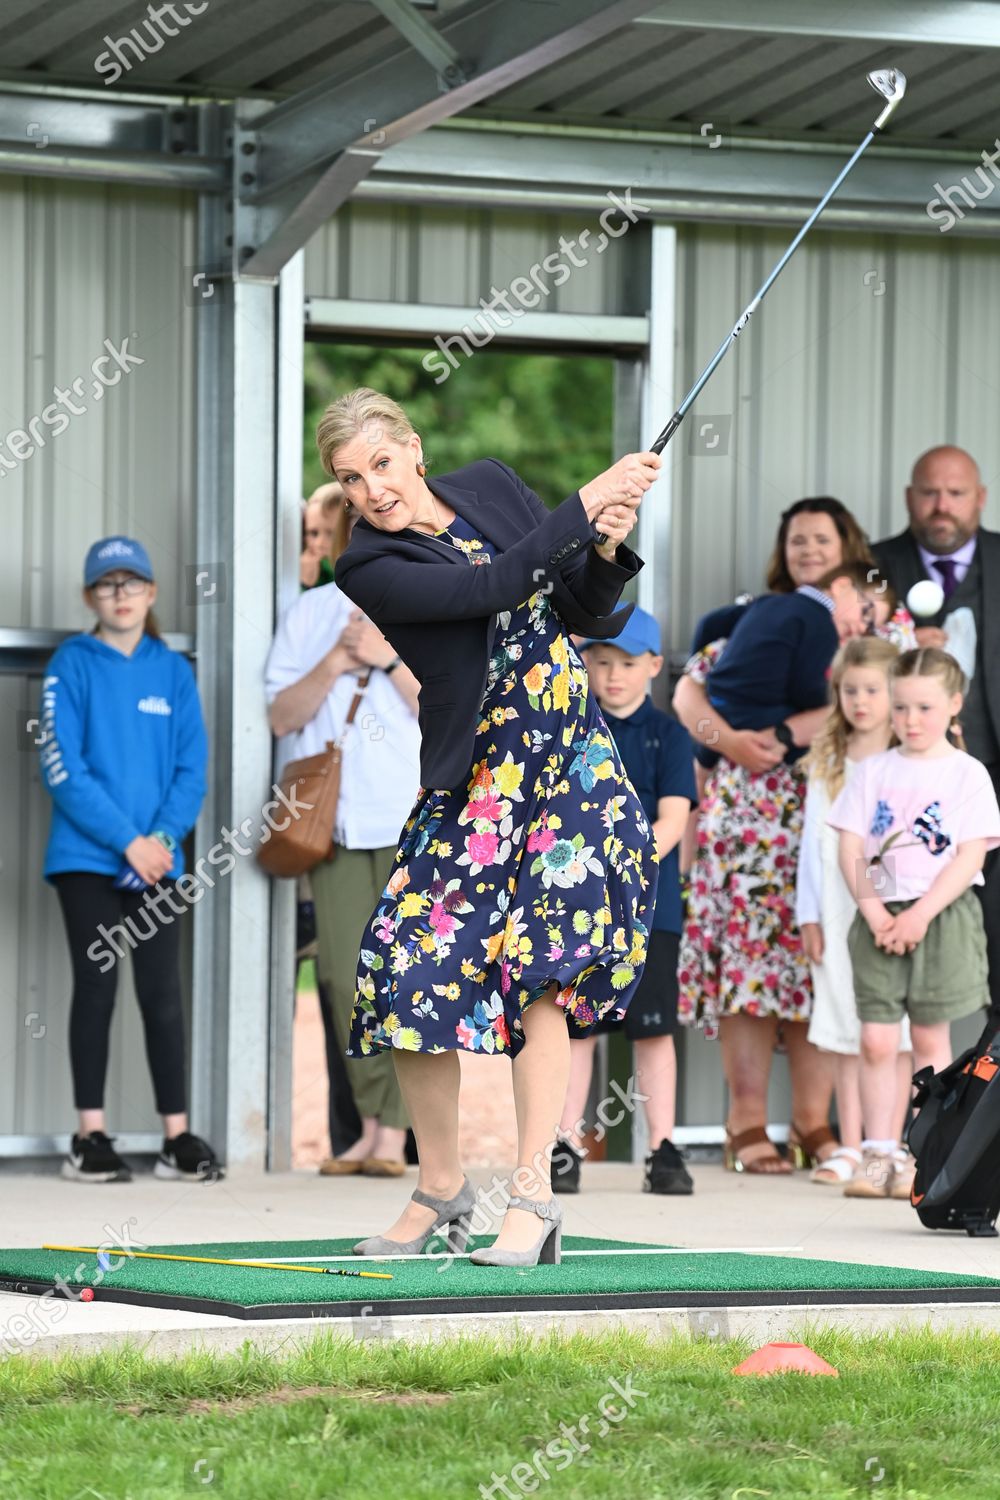 prince-edward-and-sophie-countess-of-wessex-visit-to-forfar-golf-club-scotland-uk-shutterstock-editorial-12172307z.jpg